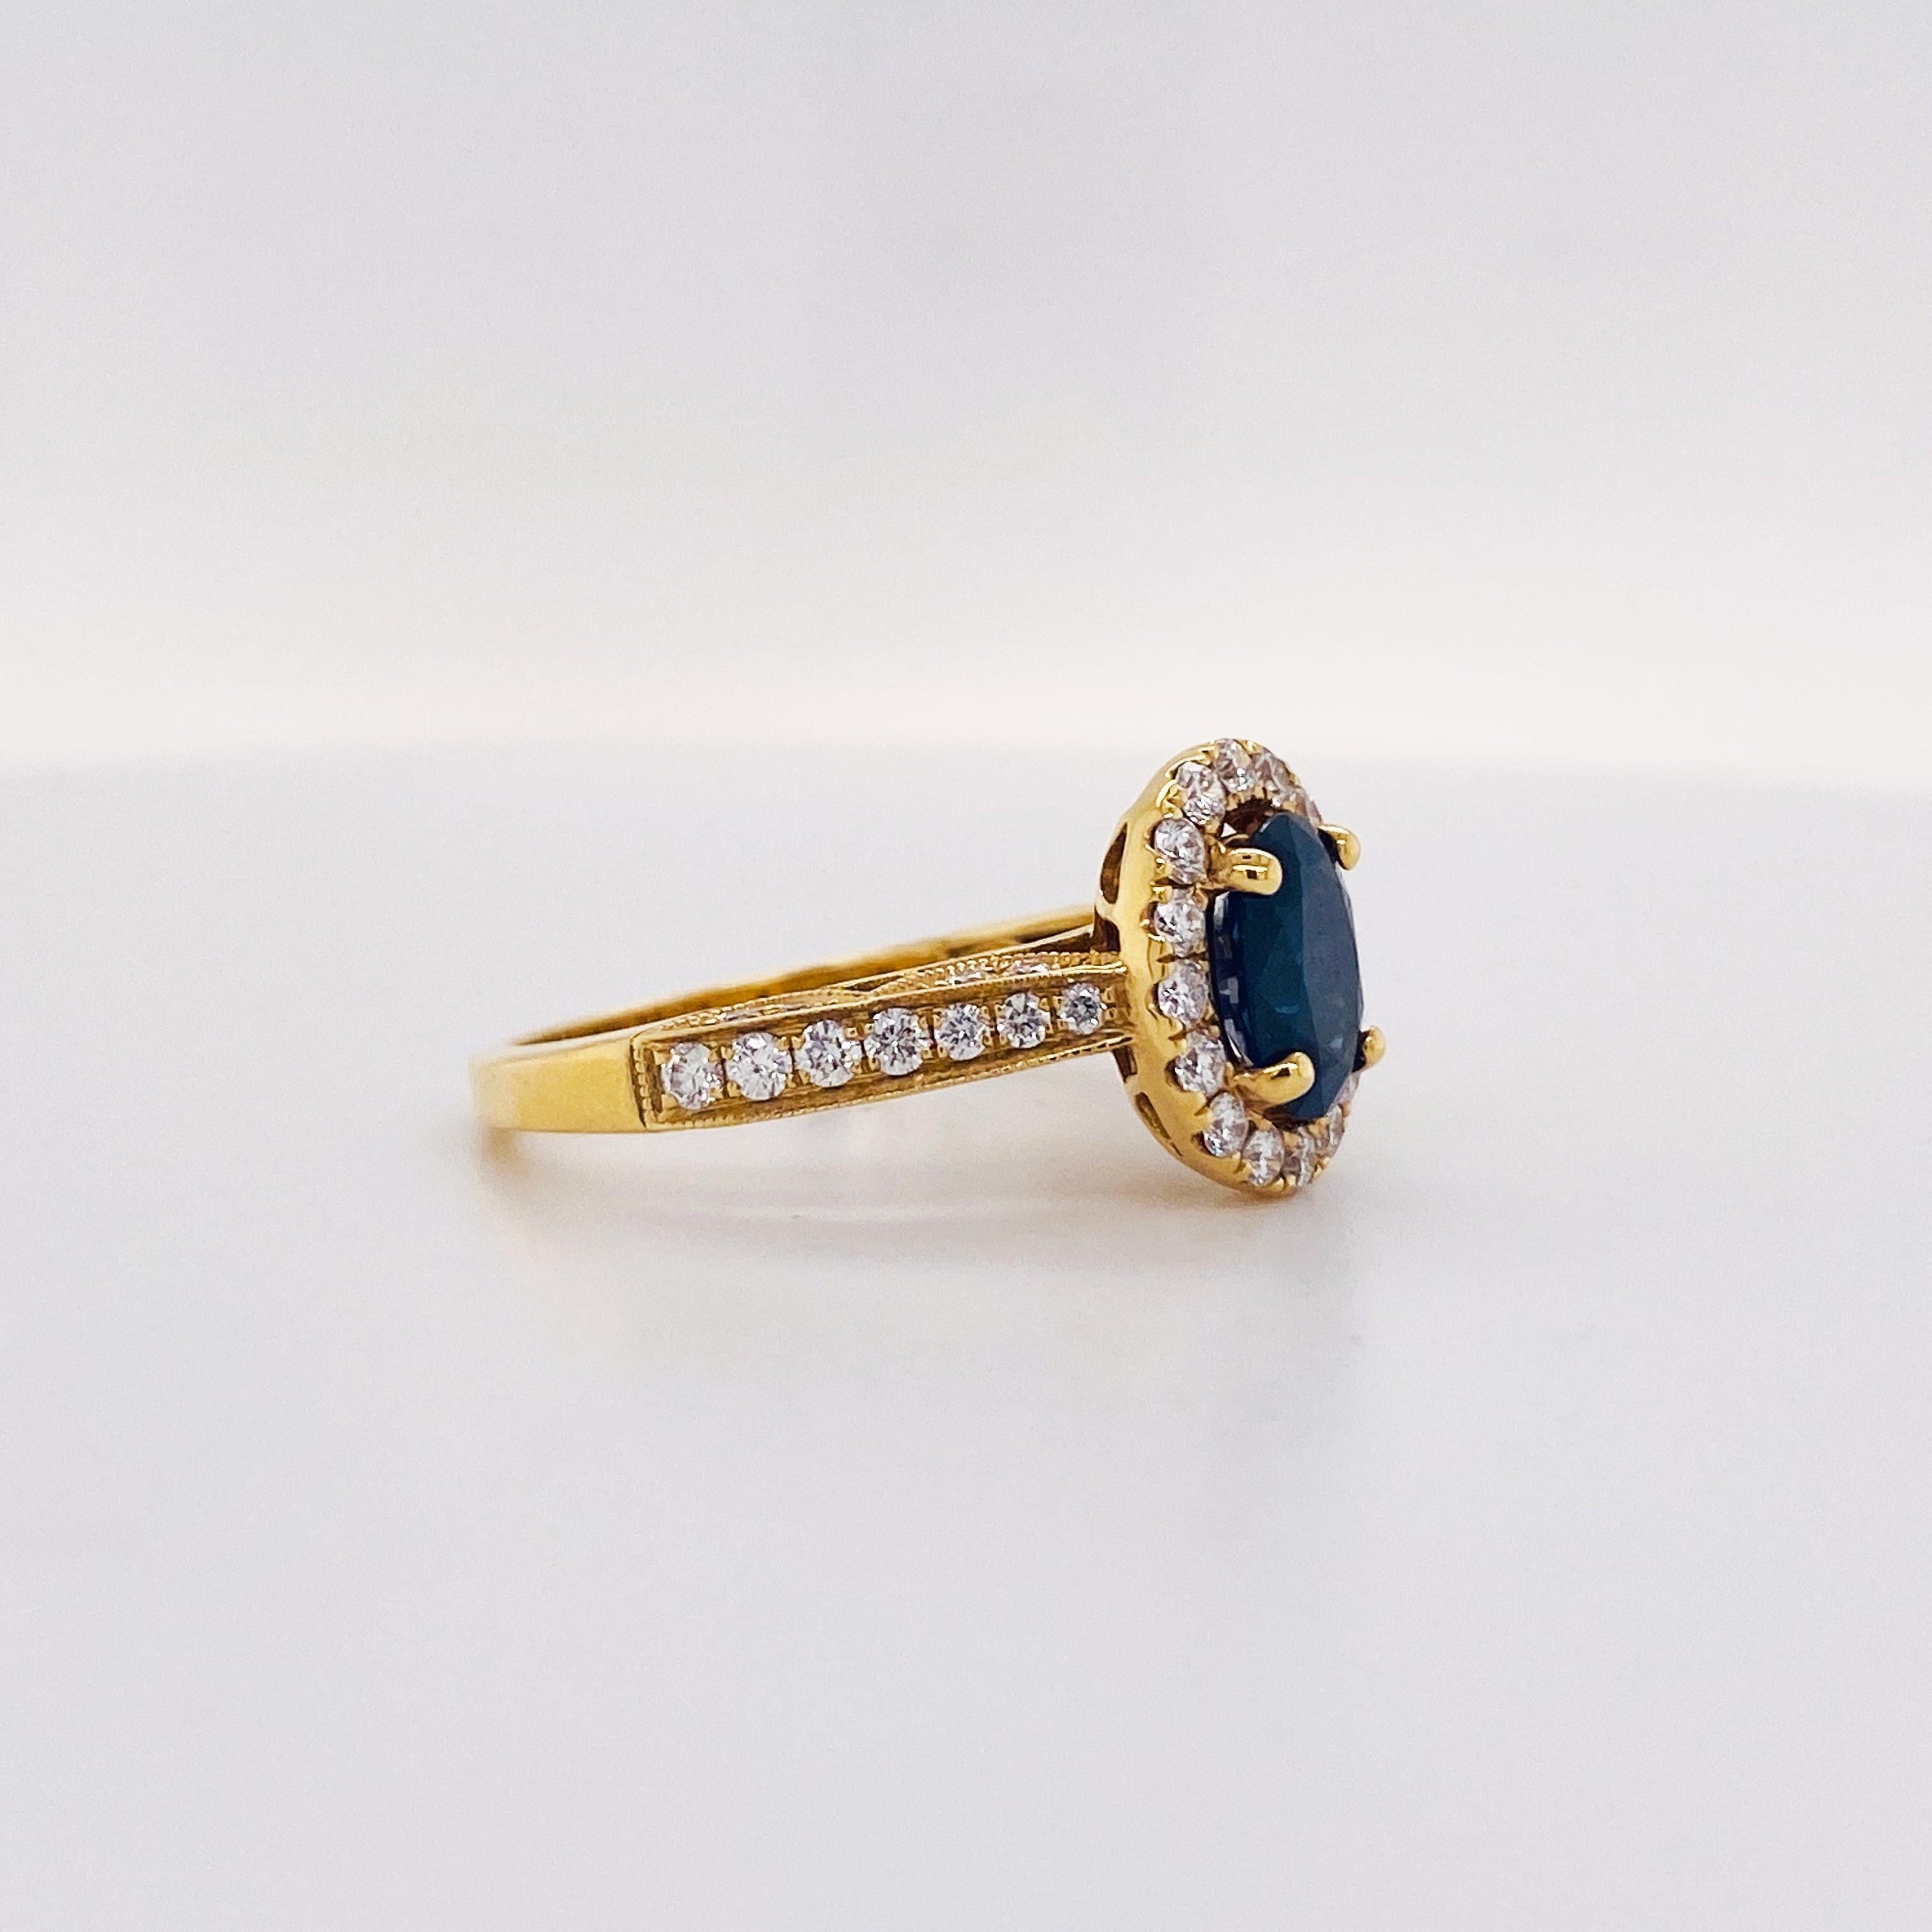 Bold & Beautiful - This 1.30 carat Deep Blue Sapphire looks amazing in the rich, 18k yellow gold! Framed with a bright white diamond halo, with diamonds of VS clarity and G-H color grades. The deep blue contrasts with the bright white diamonds and